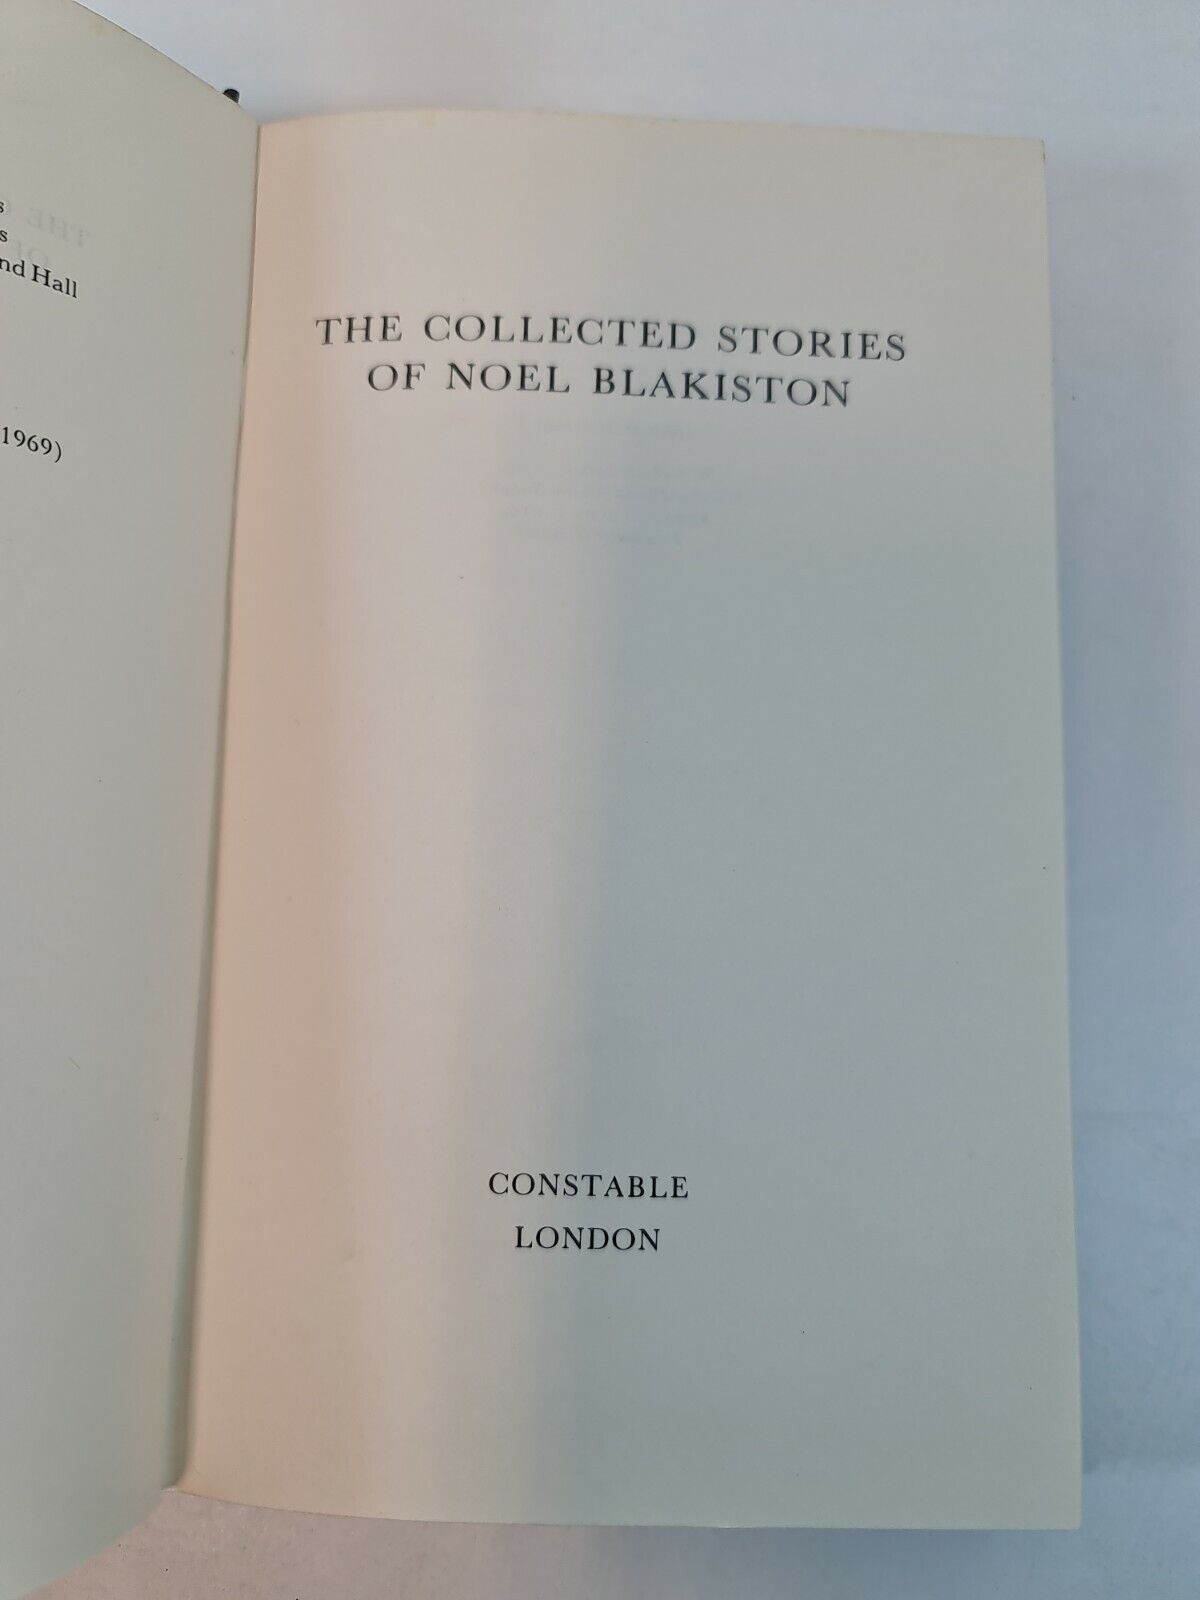 The Collected Stories of Noel Blakiston (1977)